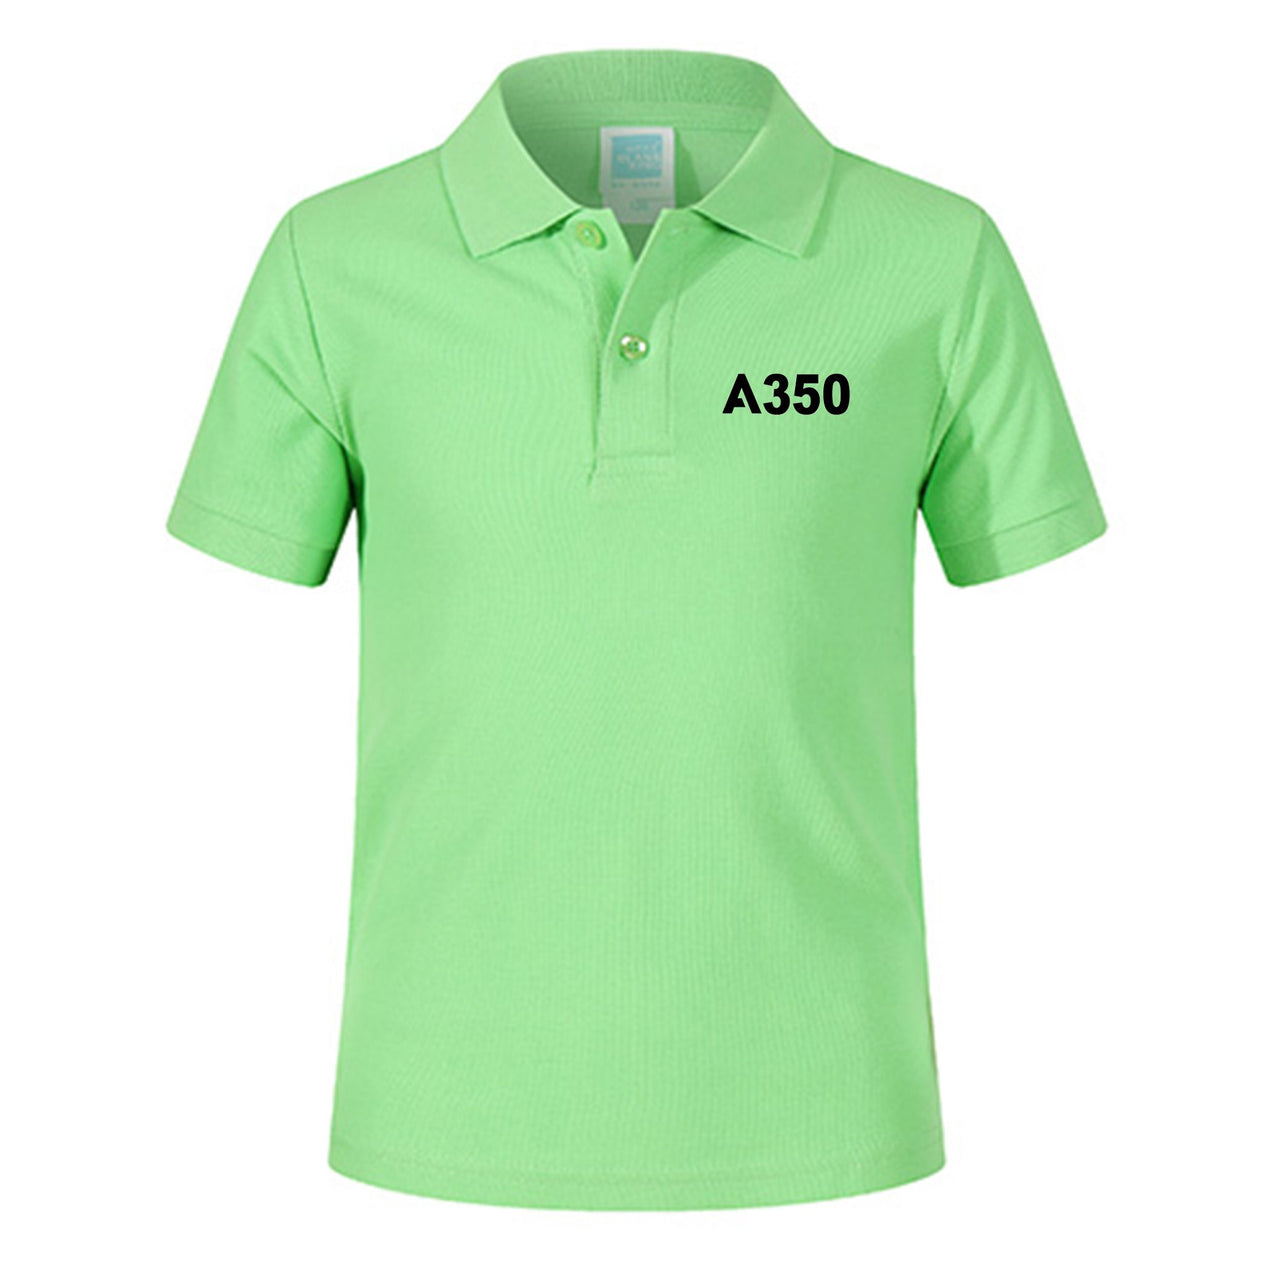 A350 Flat Text Designed Children Polo T-Shirts